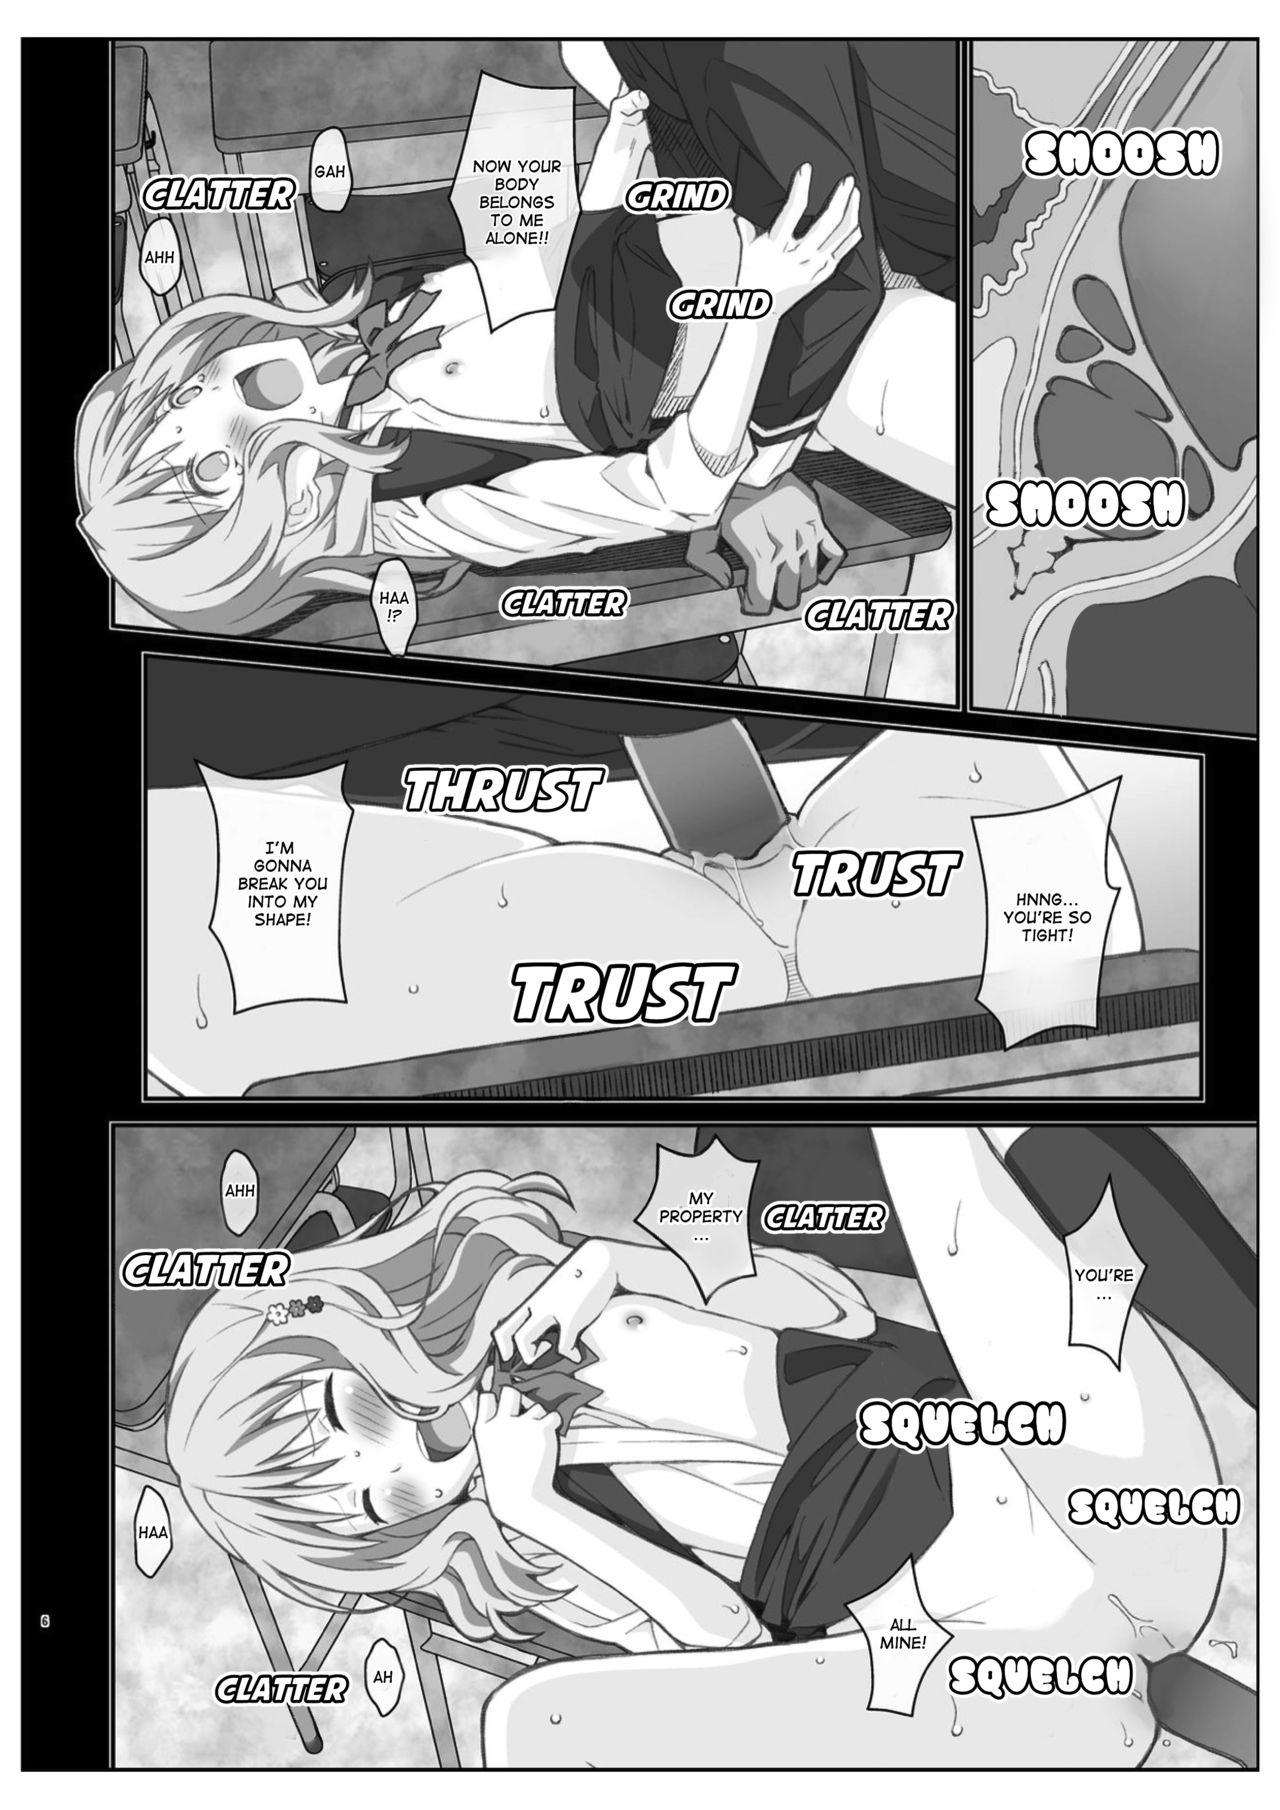 Pica TYPE-40 - Diabolik lovers Perrito - Page 5